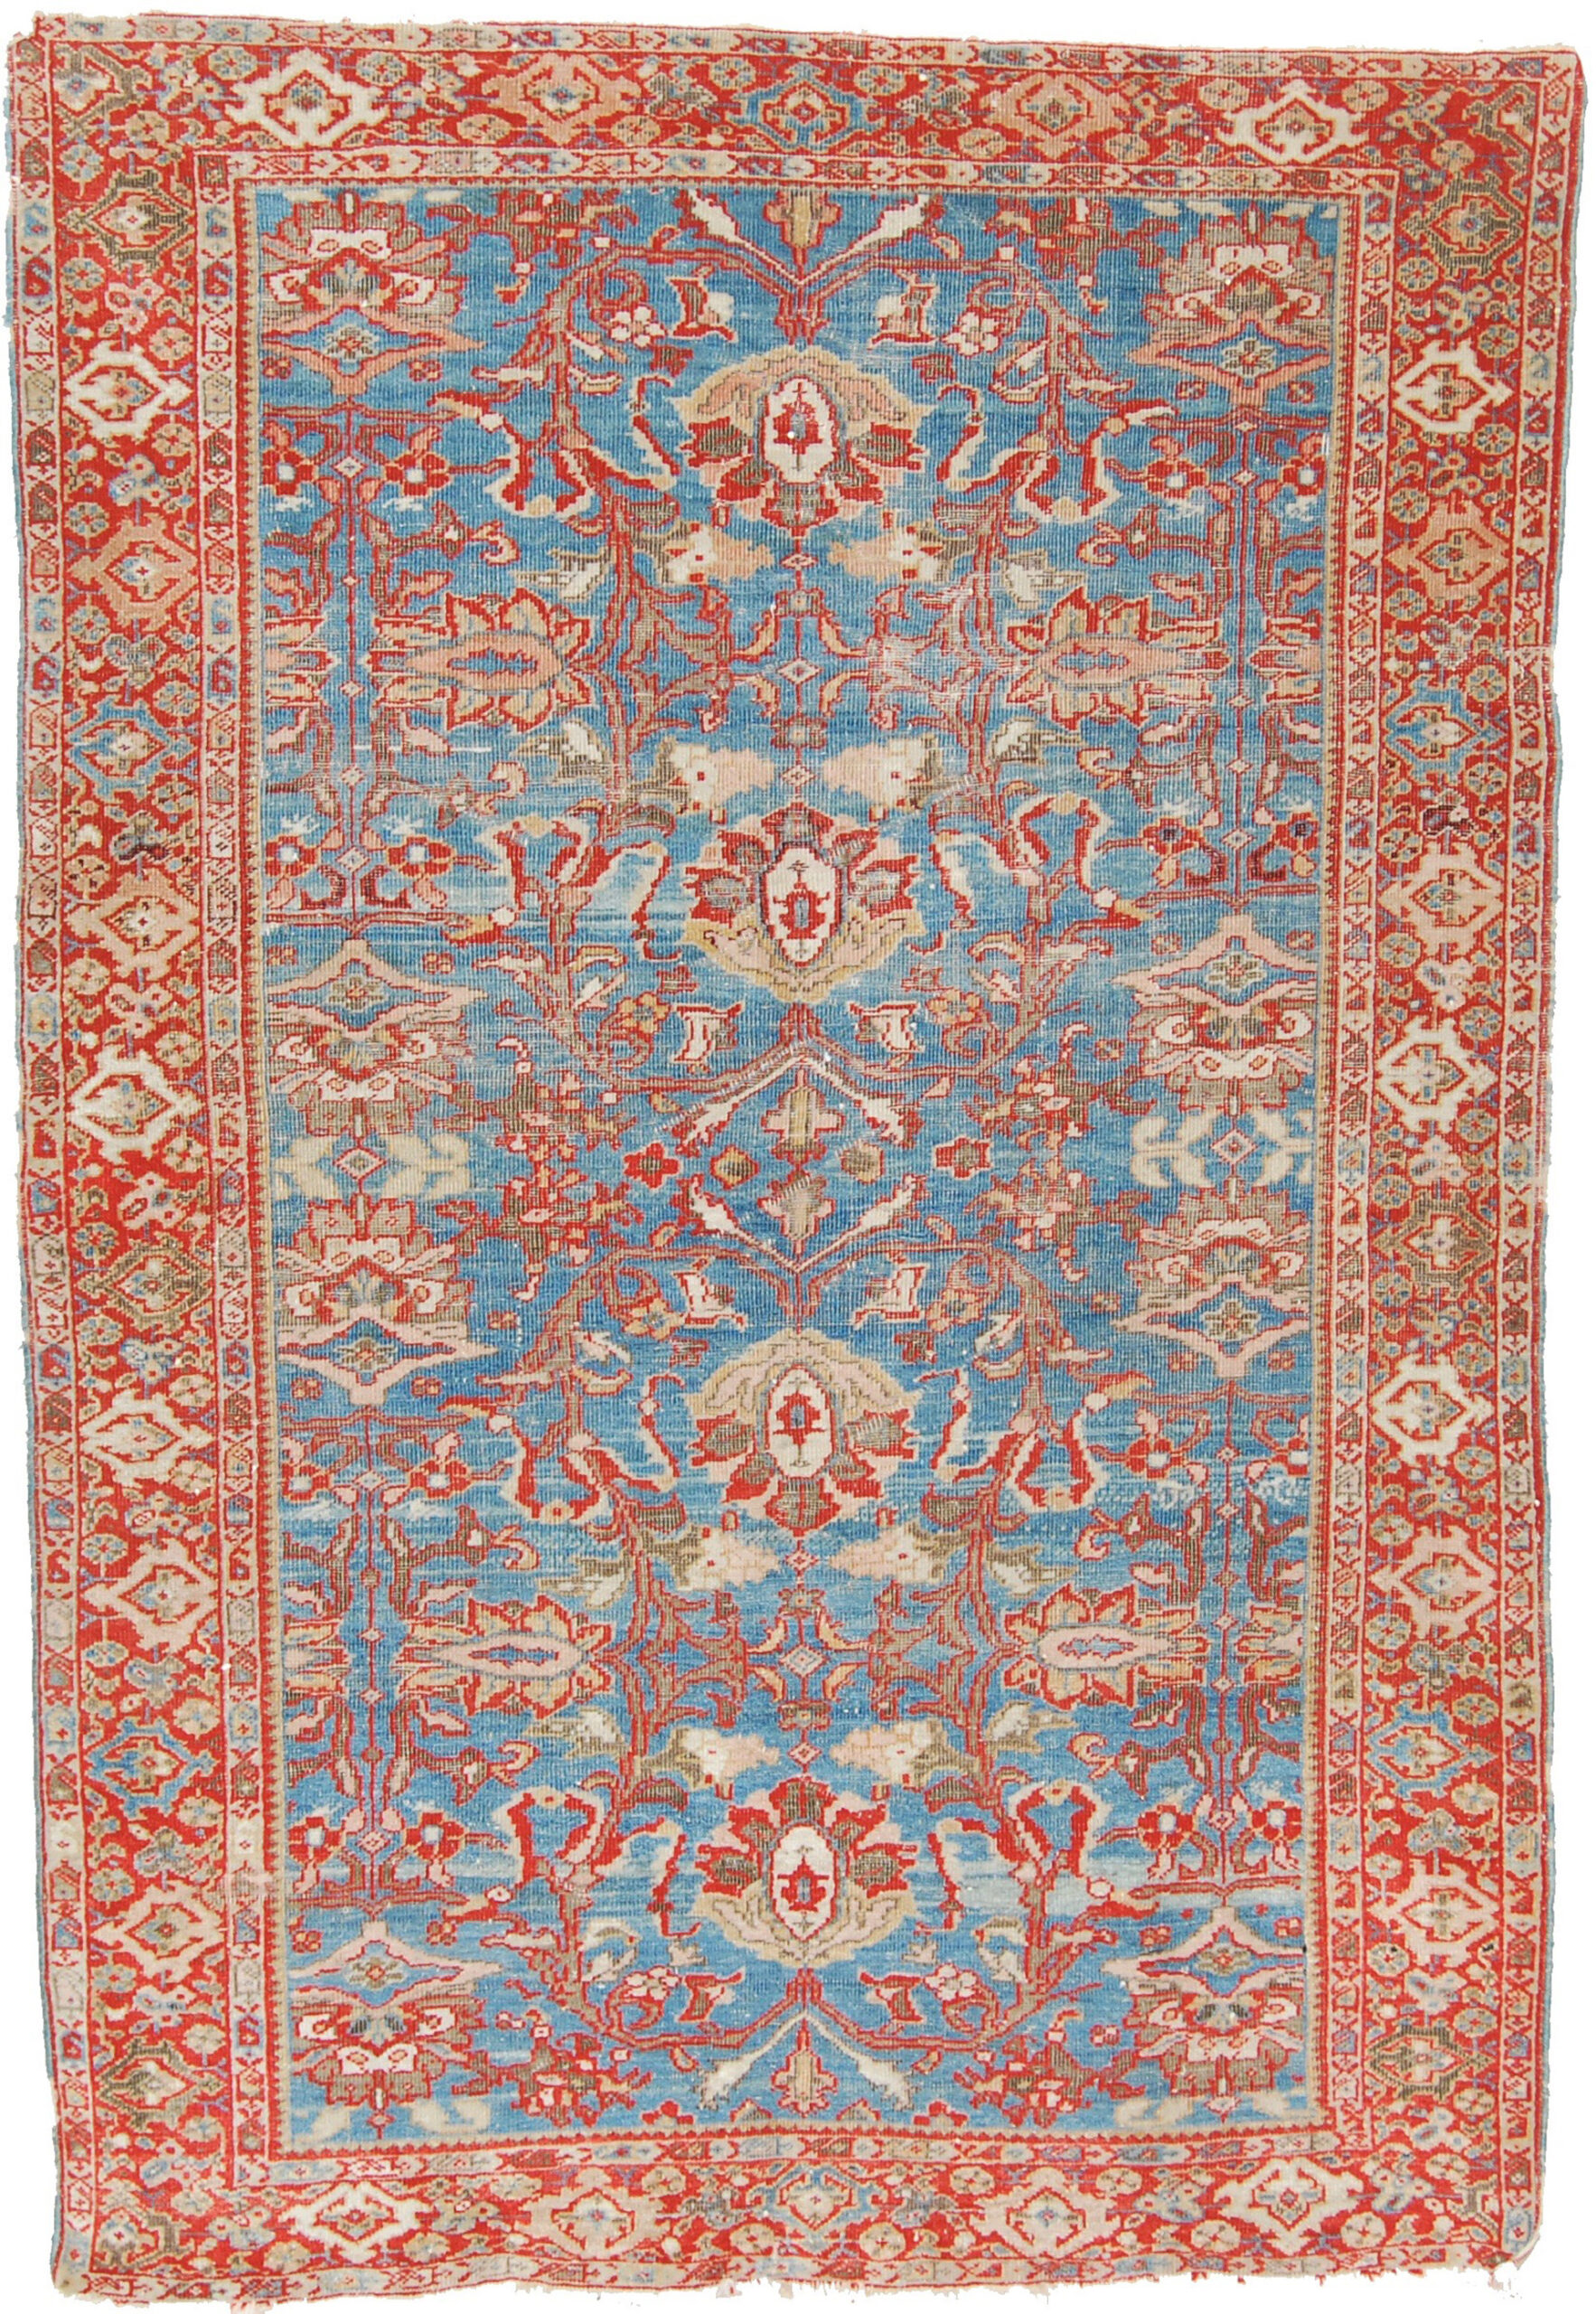 Small antique Persian Sultanabad rug with stylized floral forms on a variegated sy blue field, Douglas Stock Gallery, antique Oriental rugs Boston,MA area, antique rugs New York